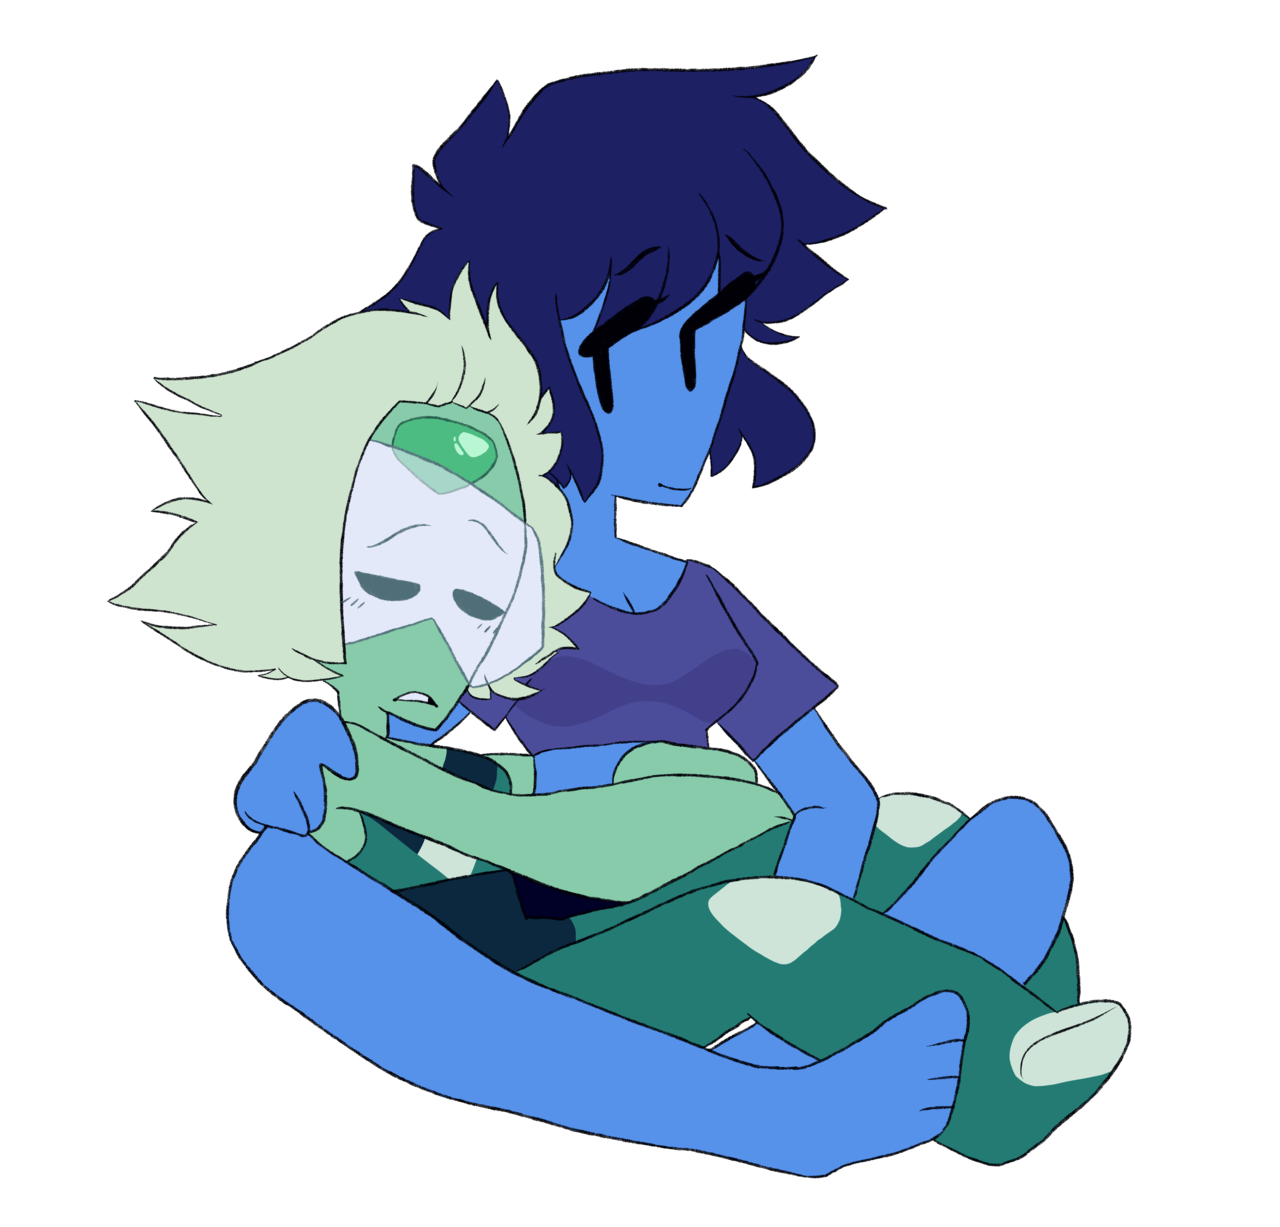 Lapidot for the third time in a row help me Lapidot sleepy times